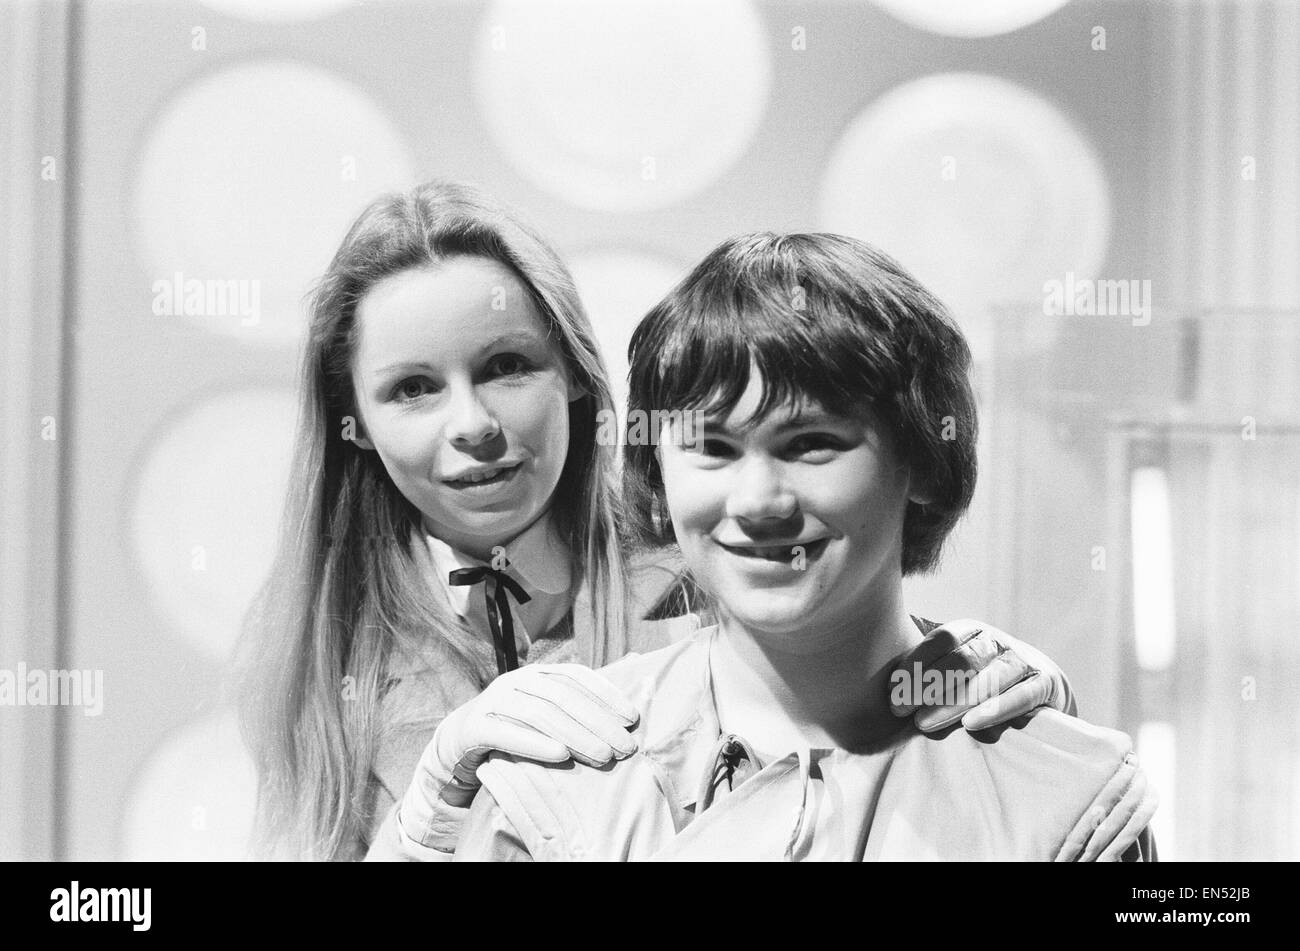 18 year old Matthew Waterhouse making his debut in the BBC TV series Dr Who. Waterhouse will play the part of Adric and seen here with Lalla Ward on the set of the Tardis at BBC TV centre. 15th May 1980 Stock Photo